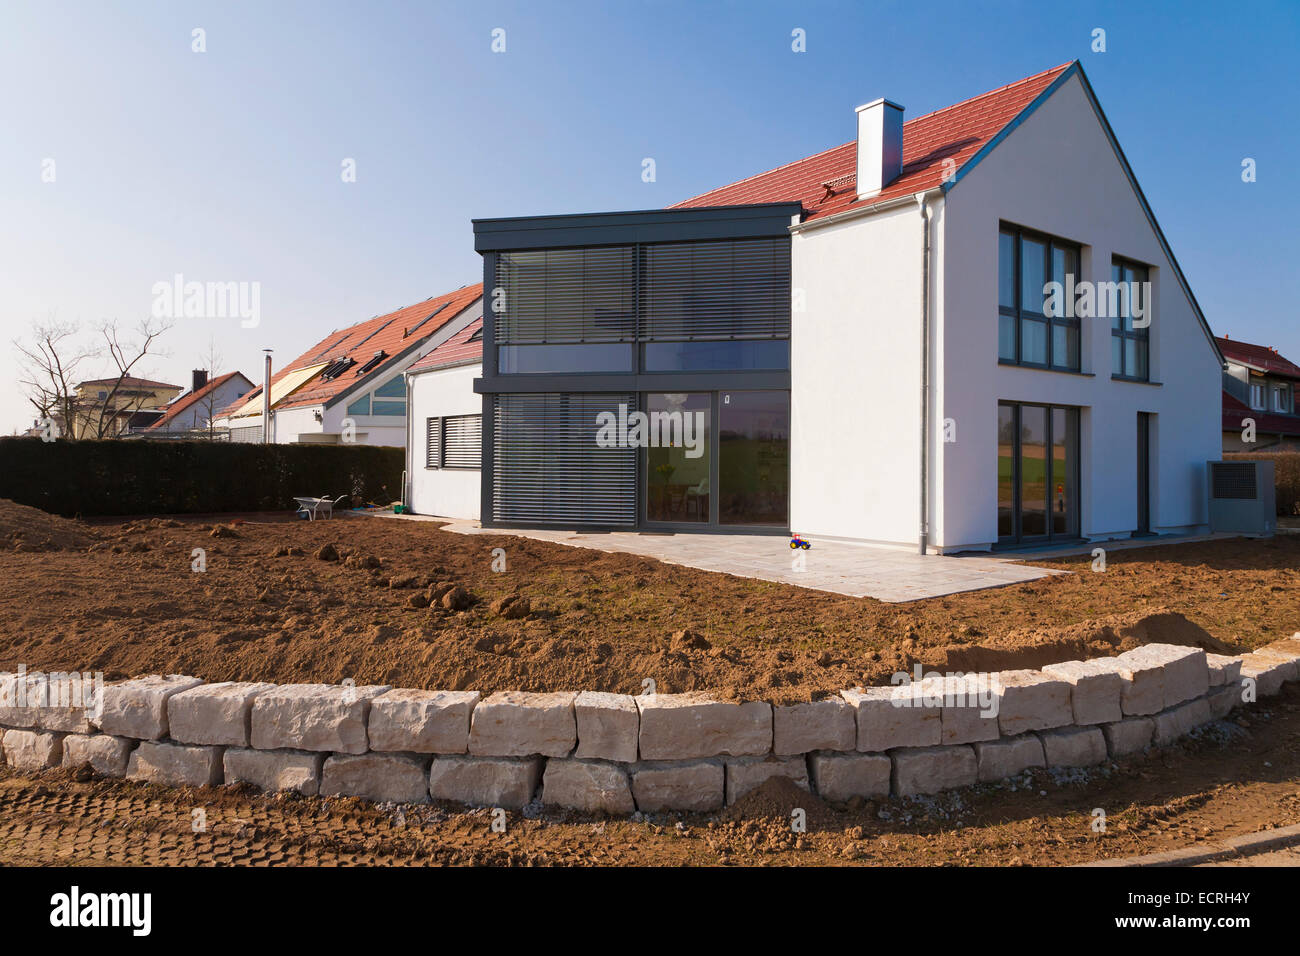 MODERN DETACHED HOUSE, NEW BUILDING, FAMILY HOME,  DWELLING HOUSE, RESIDENTIAL AREA, FELLBACH, BADEN-WURTTEMBERG, GERMANY Stock Photo